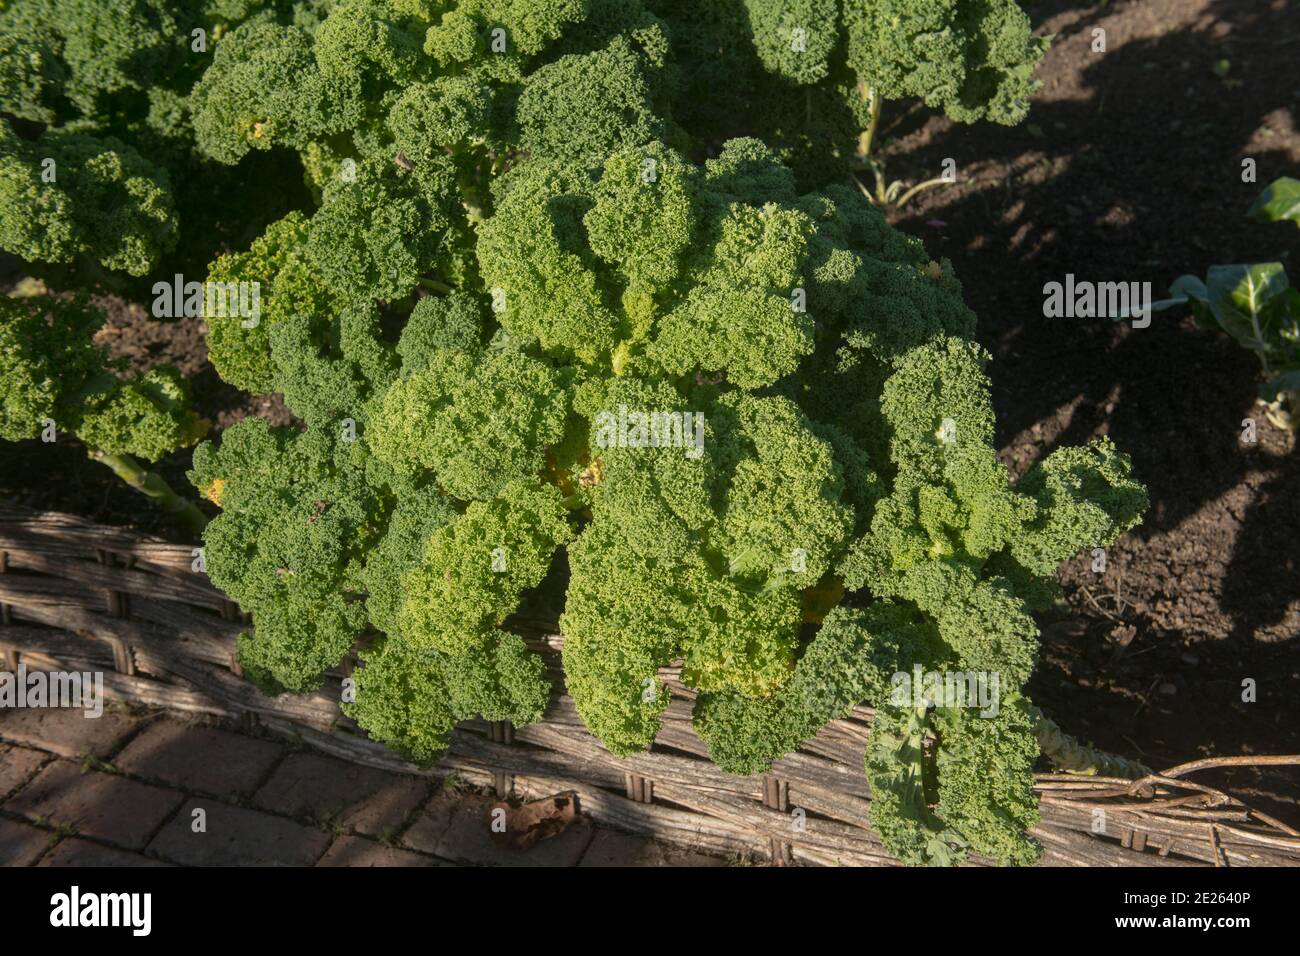 Crop of Autumn Home Grown Organic Dwarf Green Curled Kale (Brassica oleracea 'Acephala Group') Growing on an Allotment in a Vegetable Garden in Rural Stock Photo